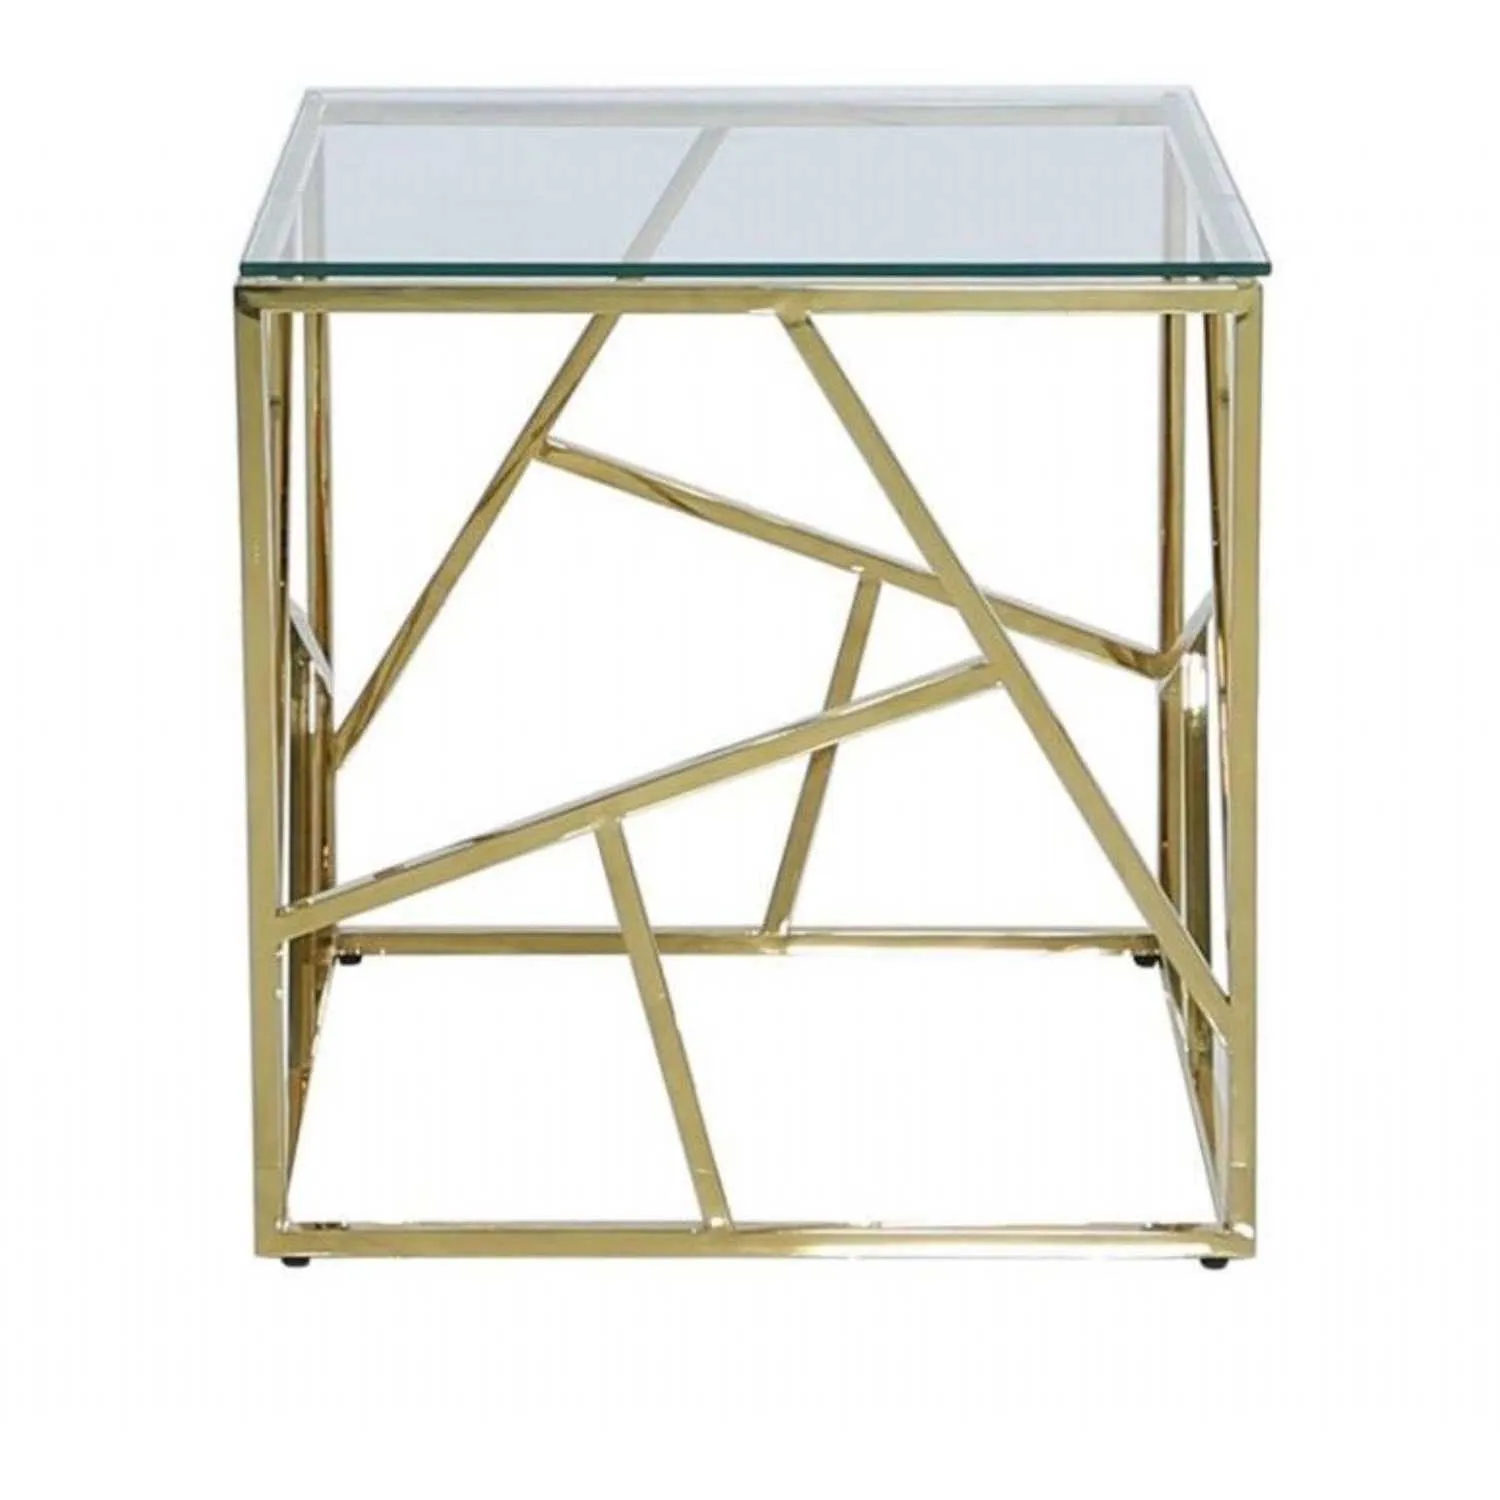 Ajax Stainless Steel Gold End Table Glass Top